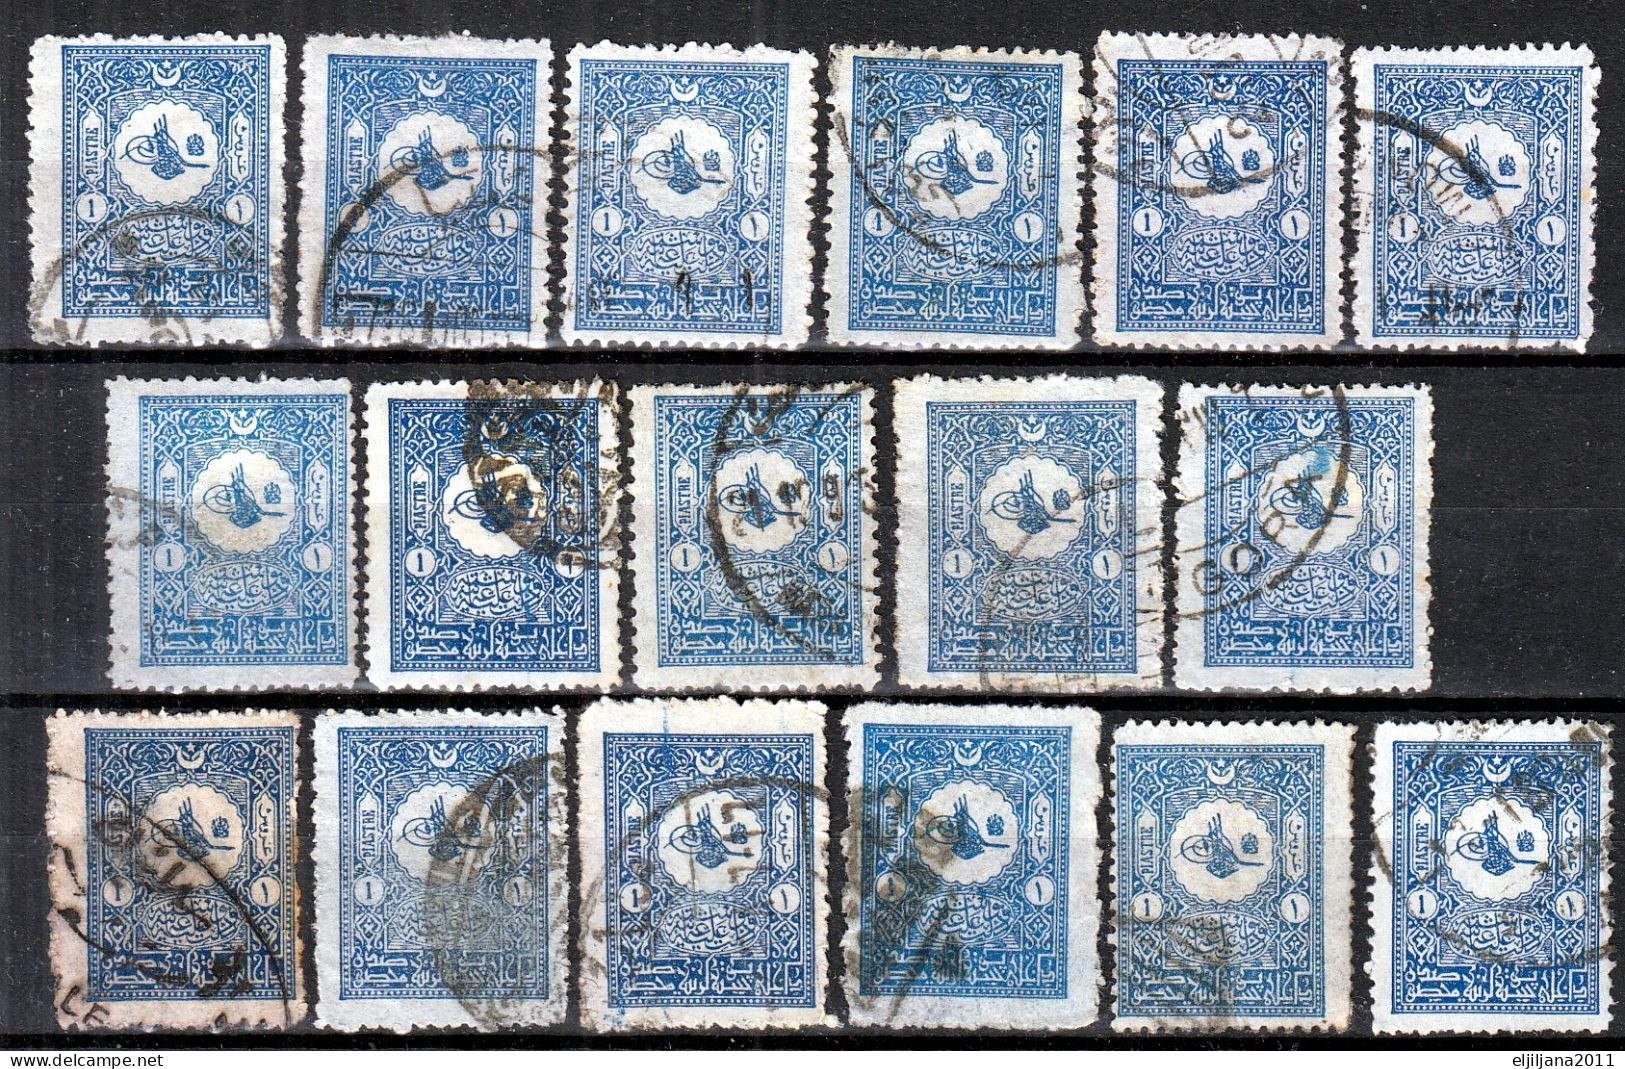 ⁕ Turkey 1901 - 1905 ⁕ Ottoman Empire / Tughra, Domestic Post 1 Pia. Mi.89 ⁕ 64v Used - Shades (unchecked Perf.) Scan - Used Stamps